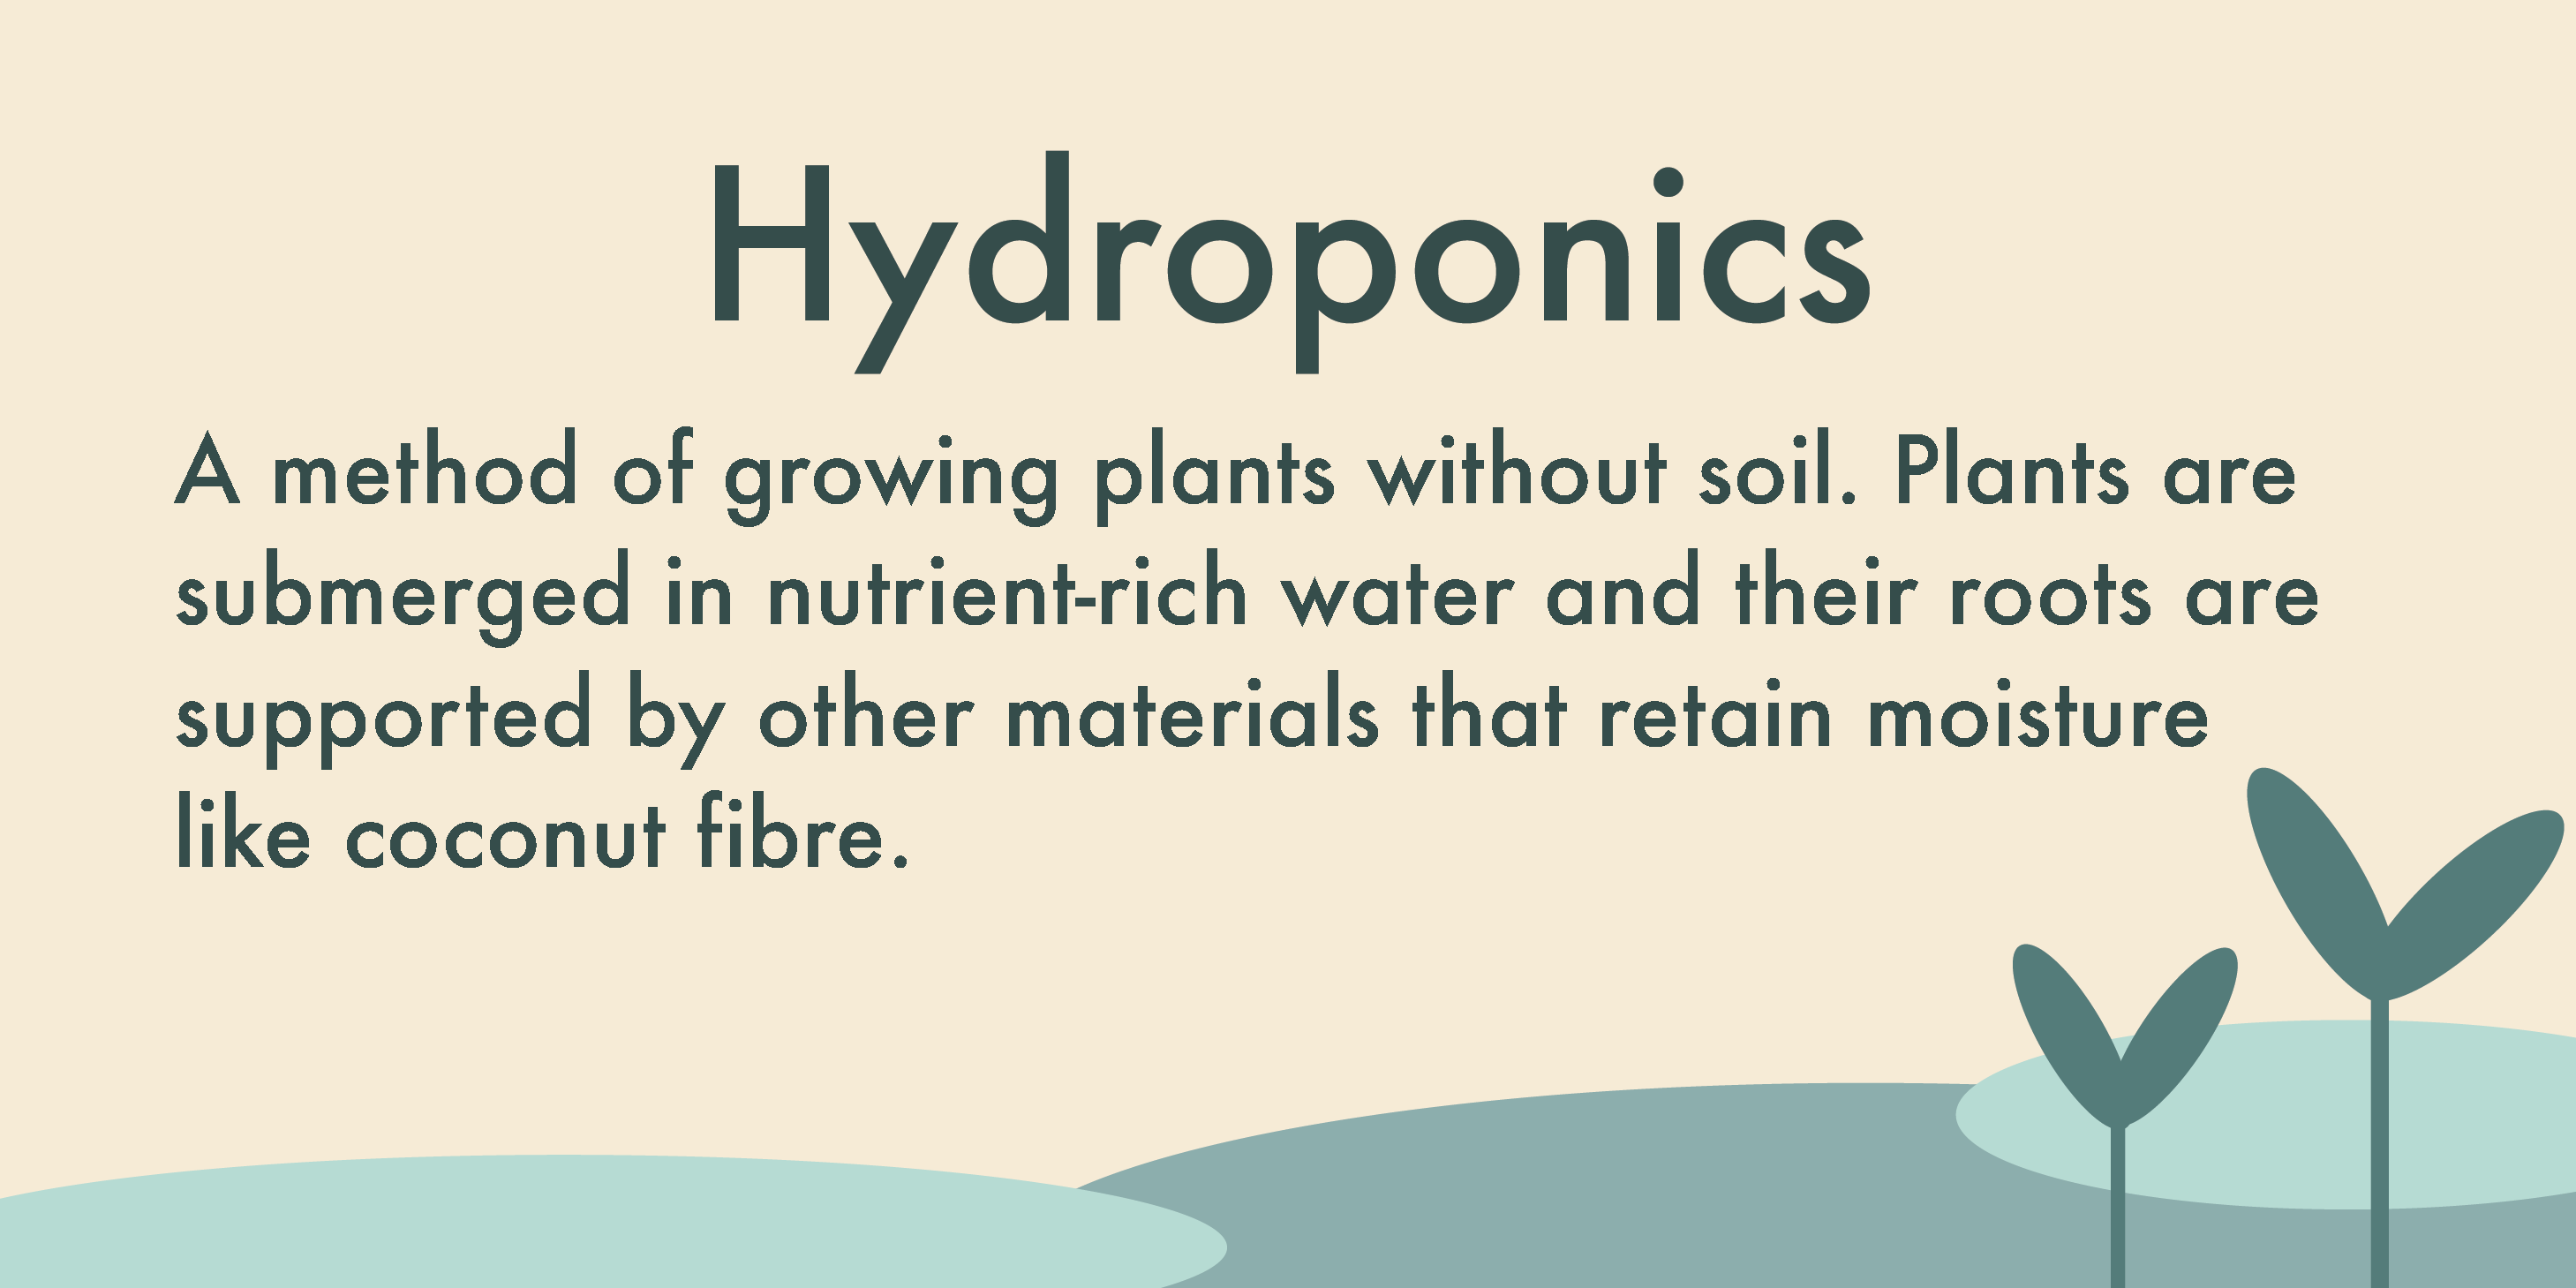 Hydroponics are a method of growing plants without soil. Plants are submerged in nutrient-rich water and their roots are supported by other materials that retain moisture, like coconut fibre.